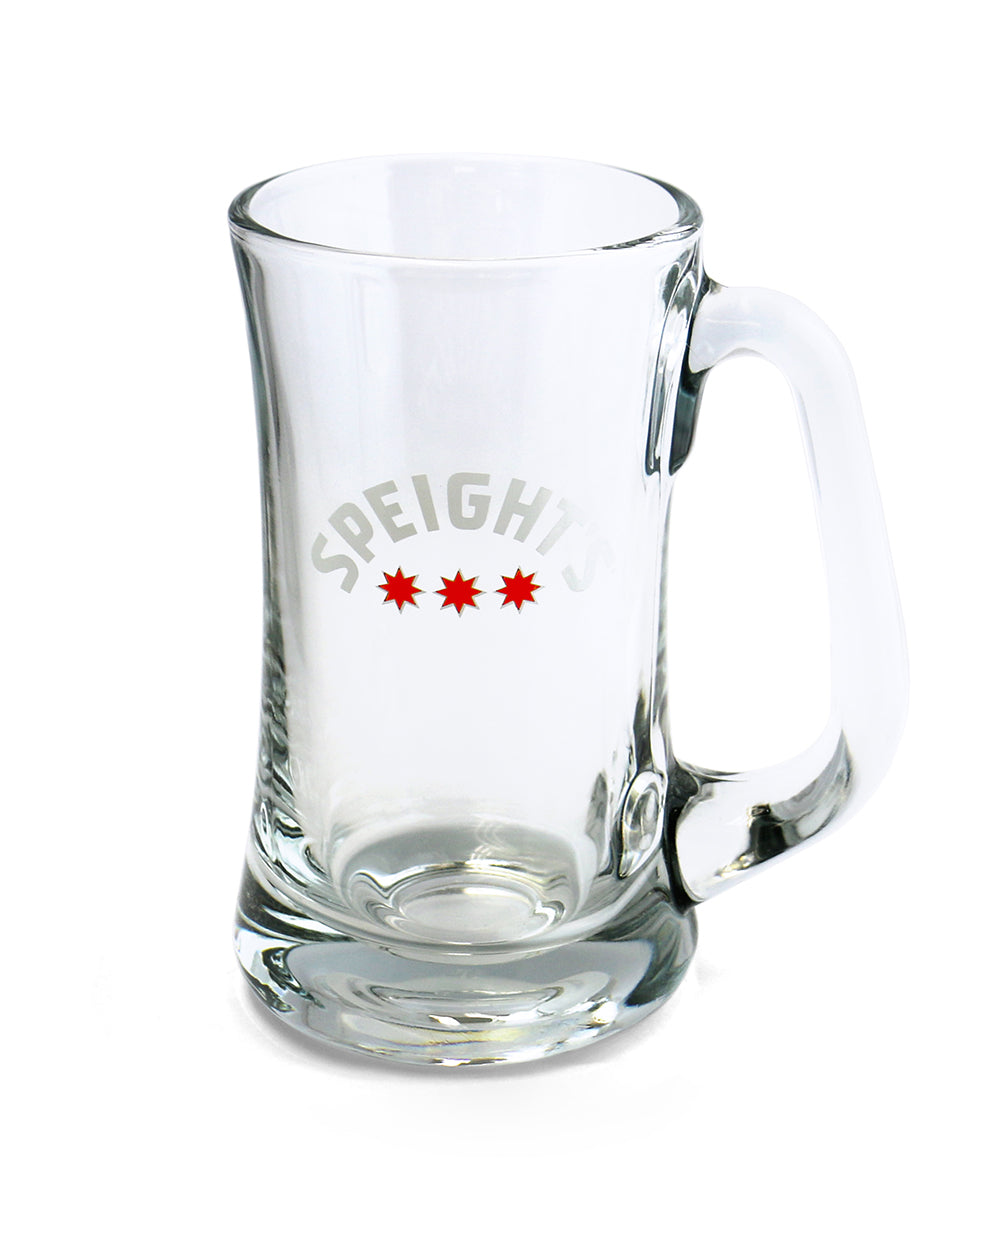 Speight's Glass with Gift Box -  Beer Gear Apparel & Merchandise - Speights - Lion Red - VB - Tokyo Dy merch